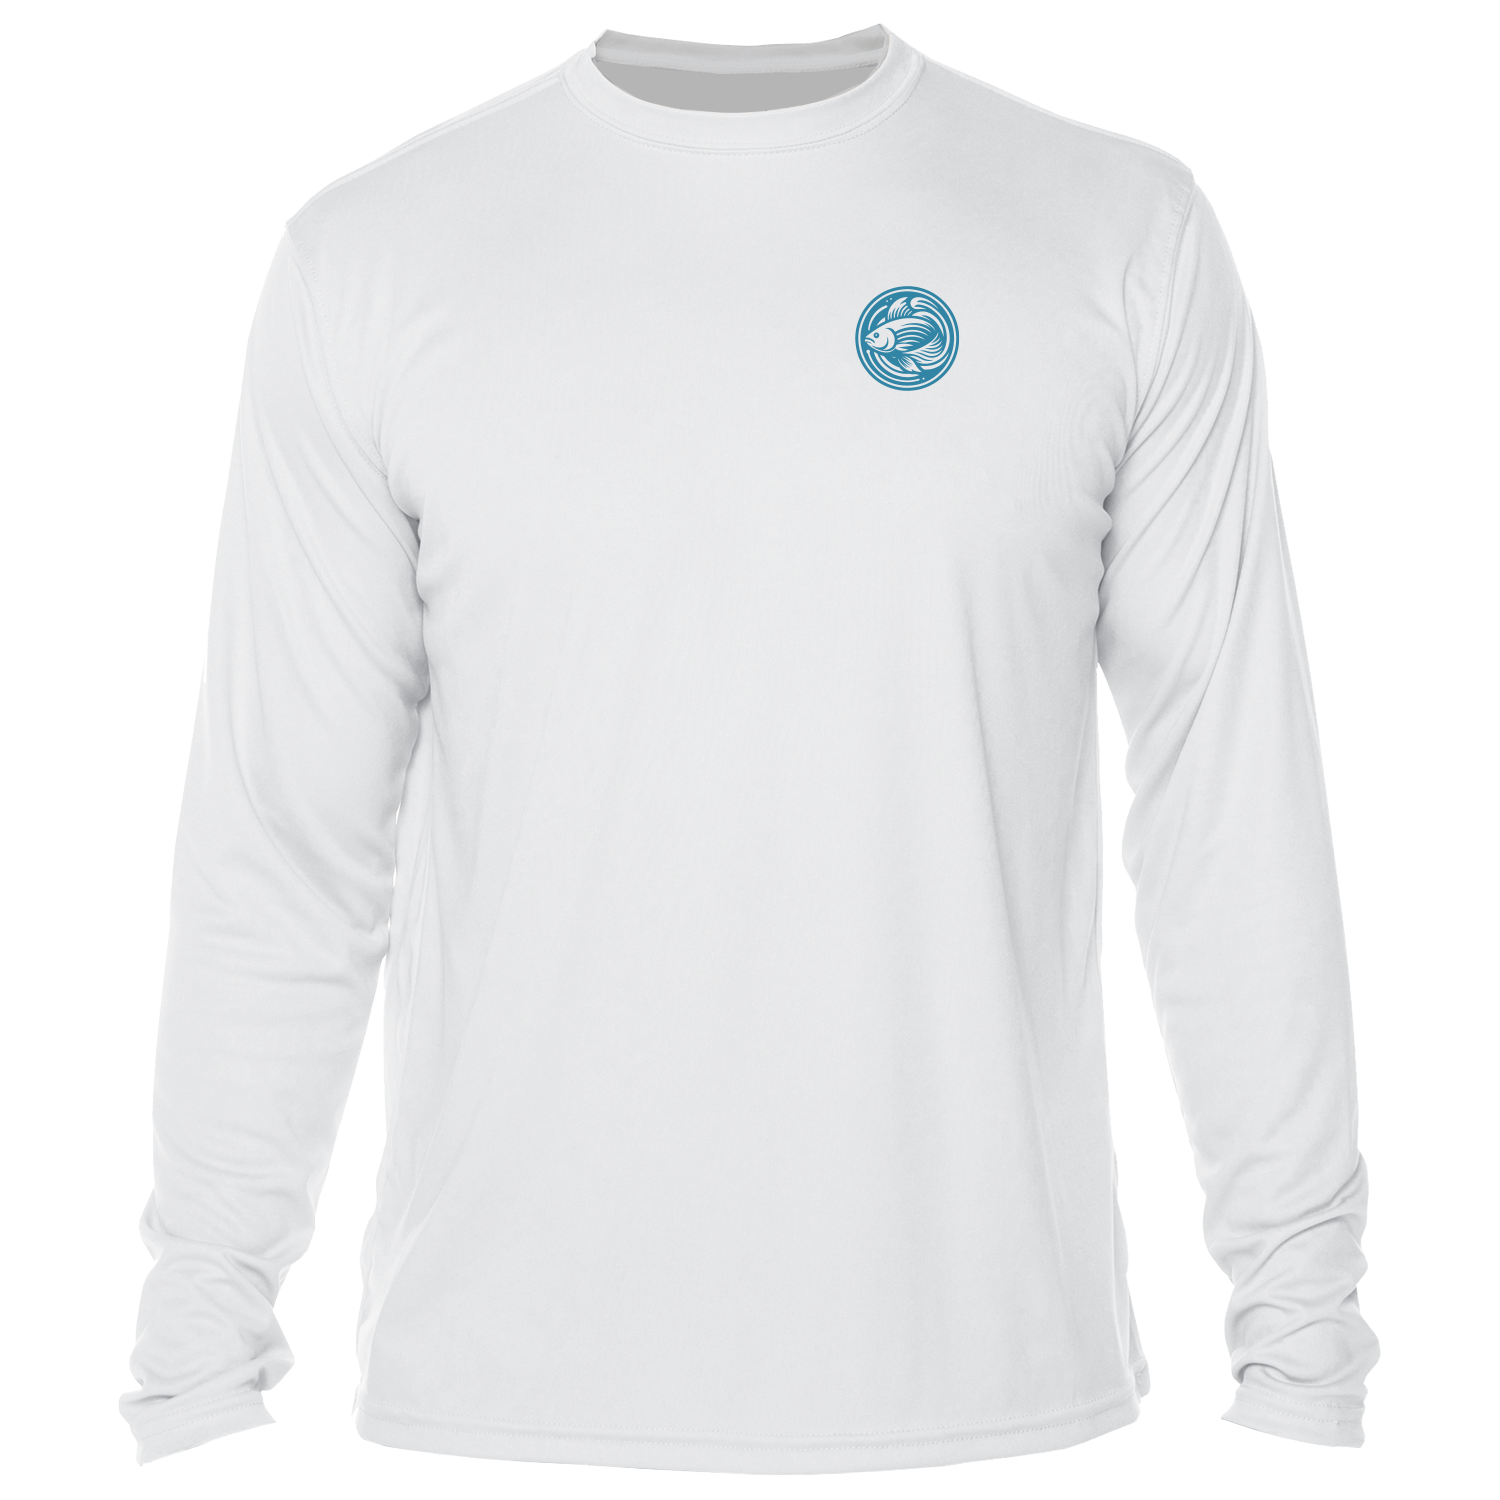 Fishing Shirt Outfitters - Angler's Collection: Tarpon - UPF 50+ Long Sleeve - Arctic Blue,Med